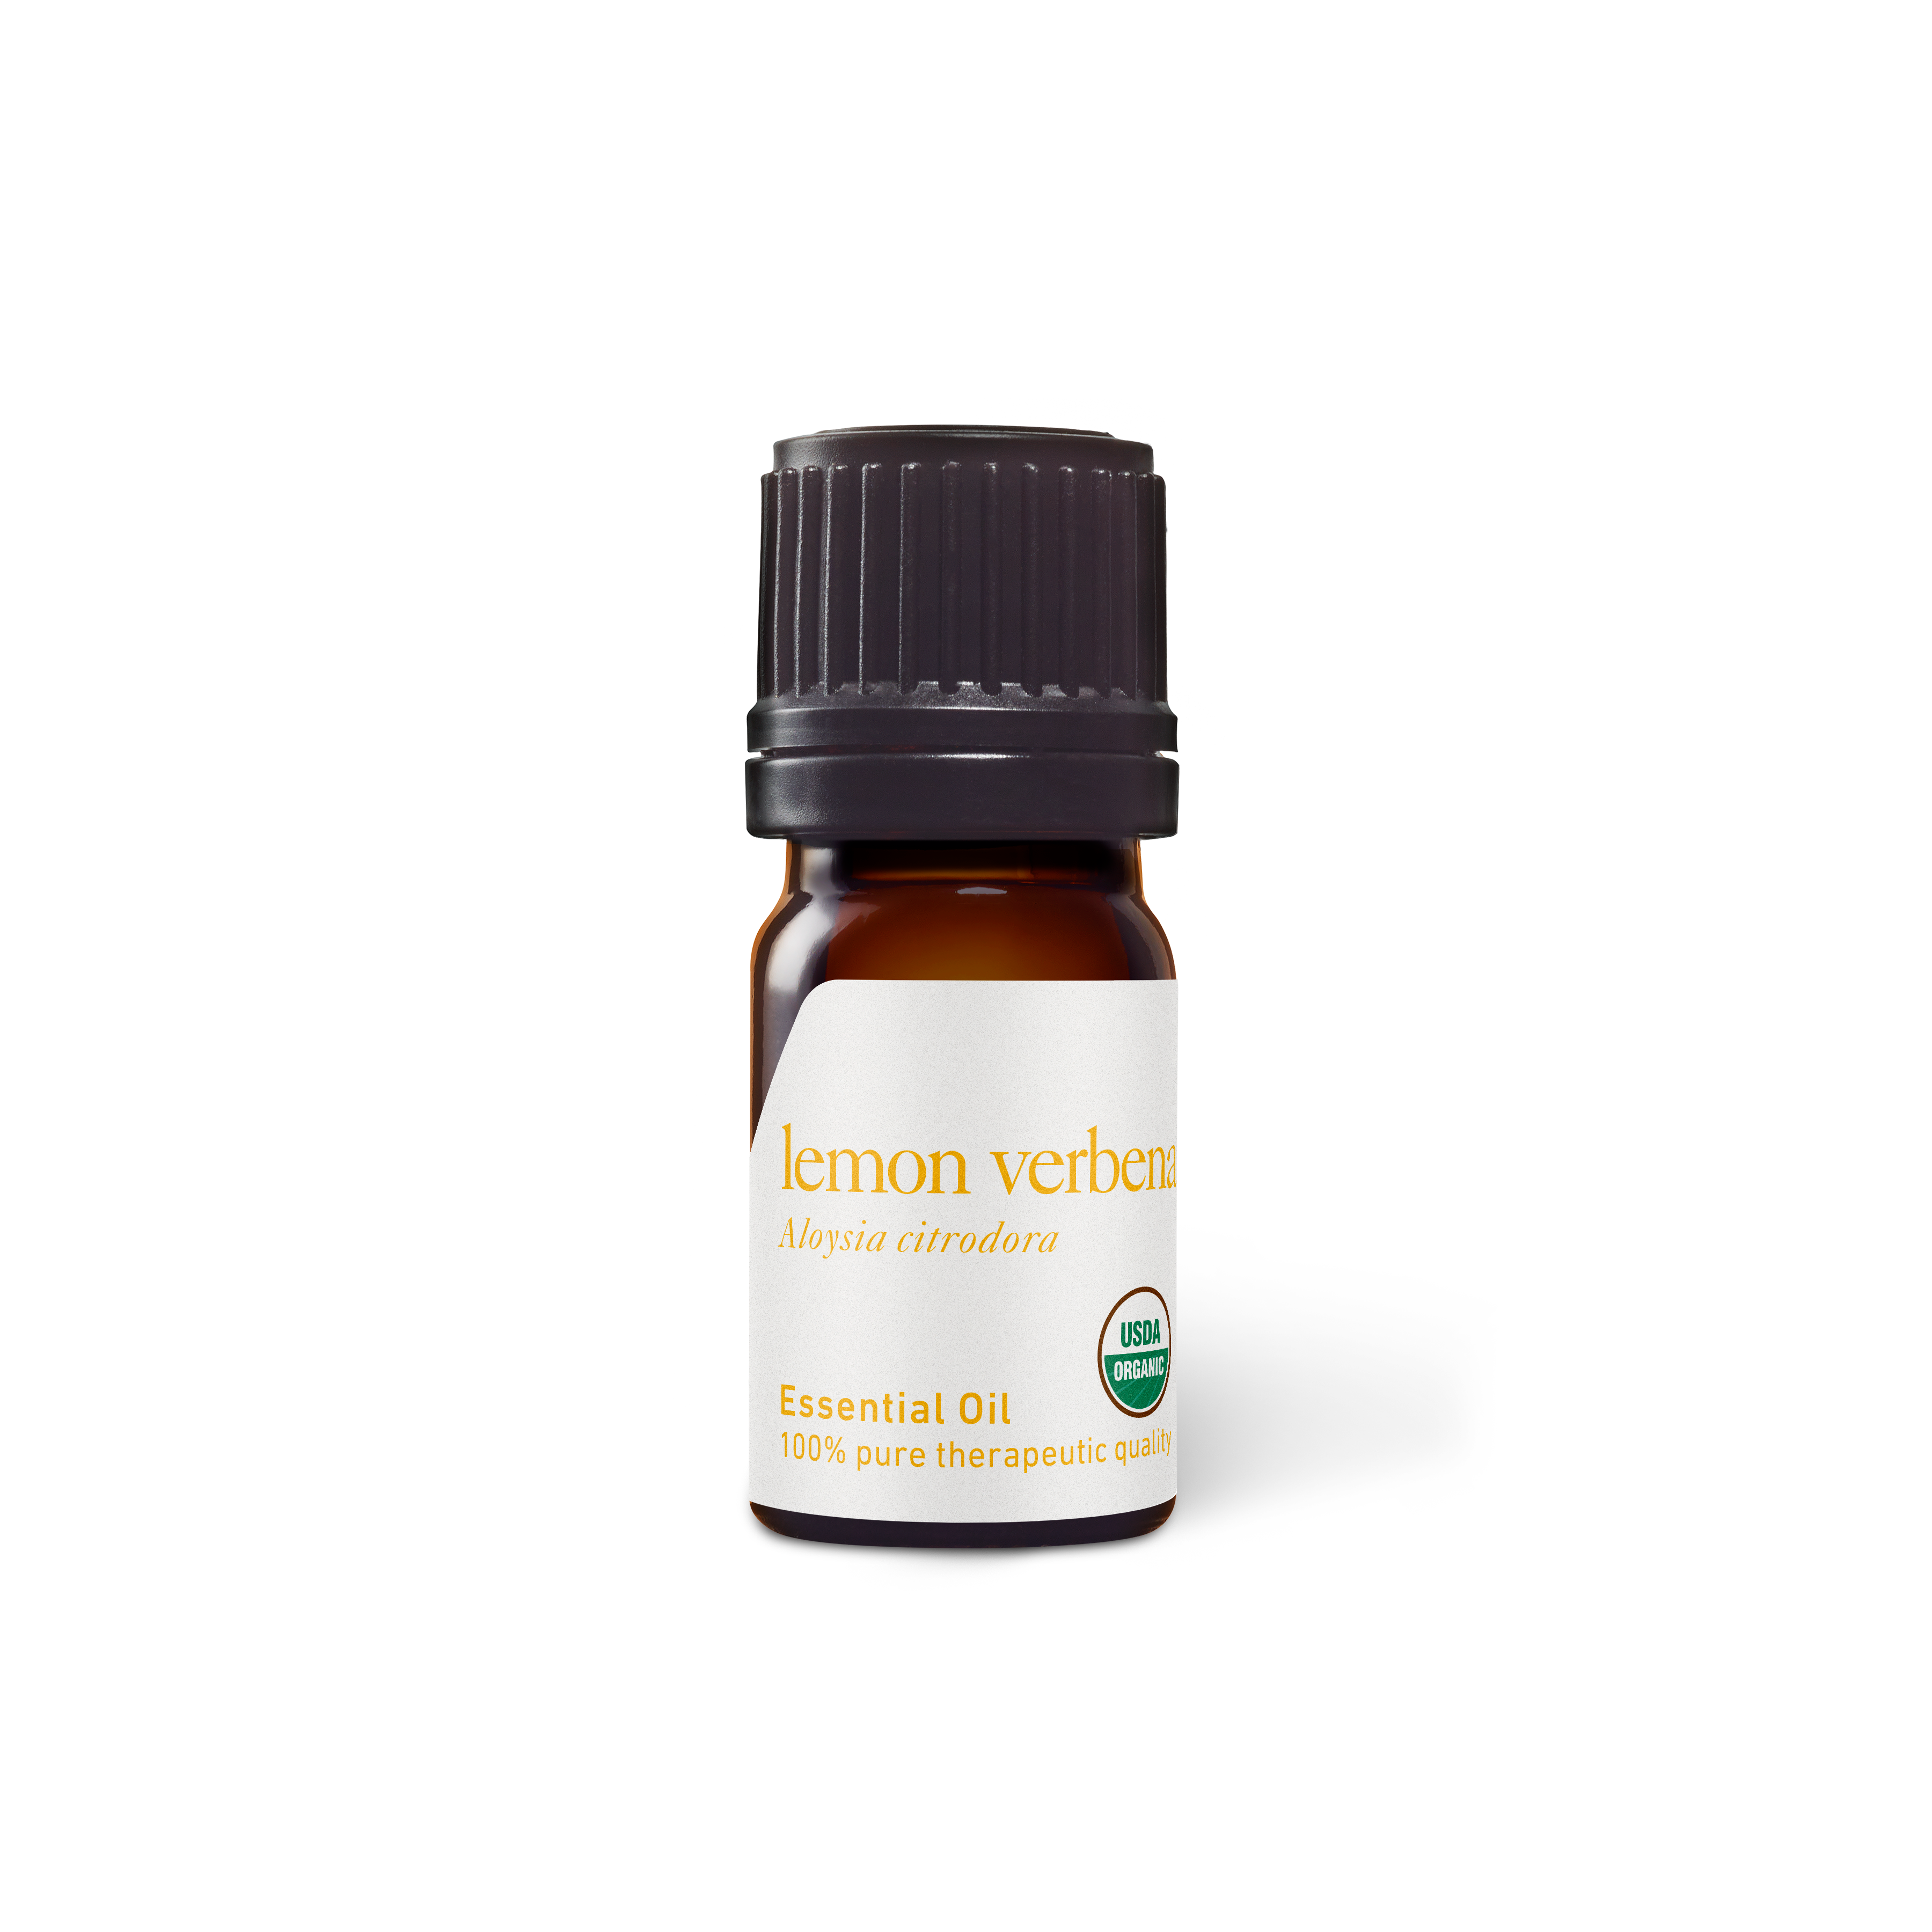 MR Essentials TT - 🌿 Lemon Verbena Essential Oil Benefits 🌿 Wholesale  Quantities 🌿 In Stock Now 🌿 Check out our detailed listing below 🌿 ⁣ ⁣  Contact us today at M.R.